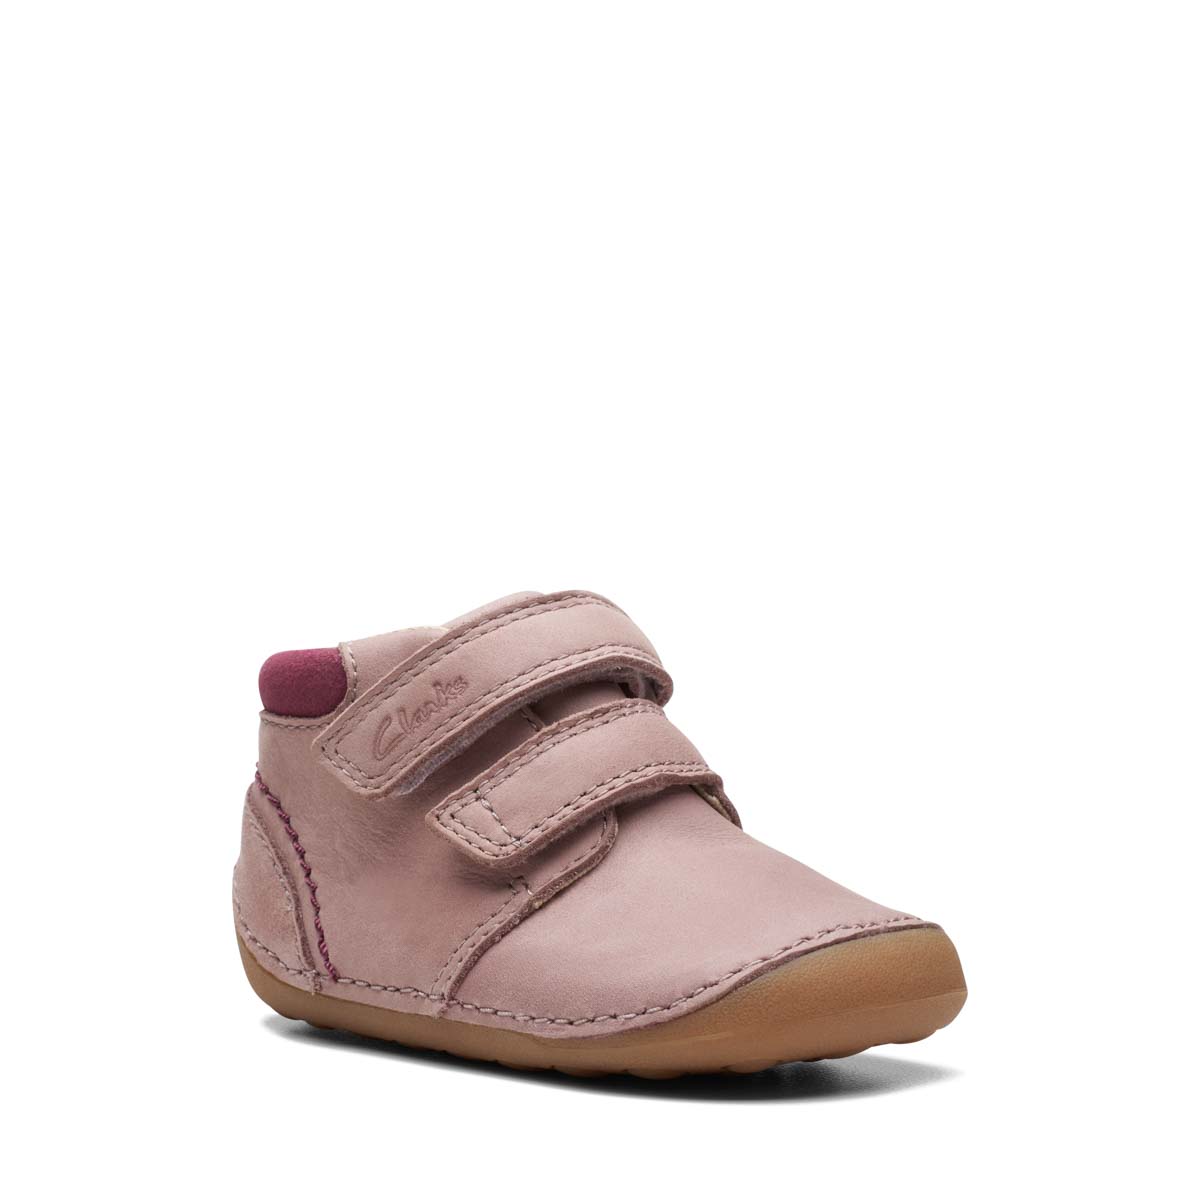 Clarks Tiny Play Boot Pink Leather Kids girls first and baby shoes 7545-06F in a Plain Leather in Size 4.5